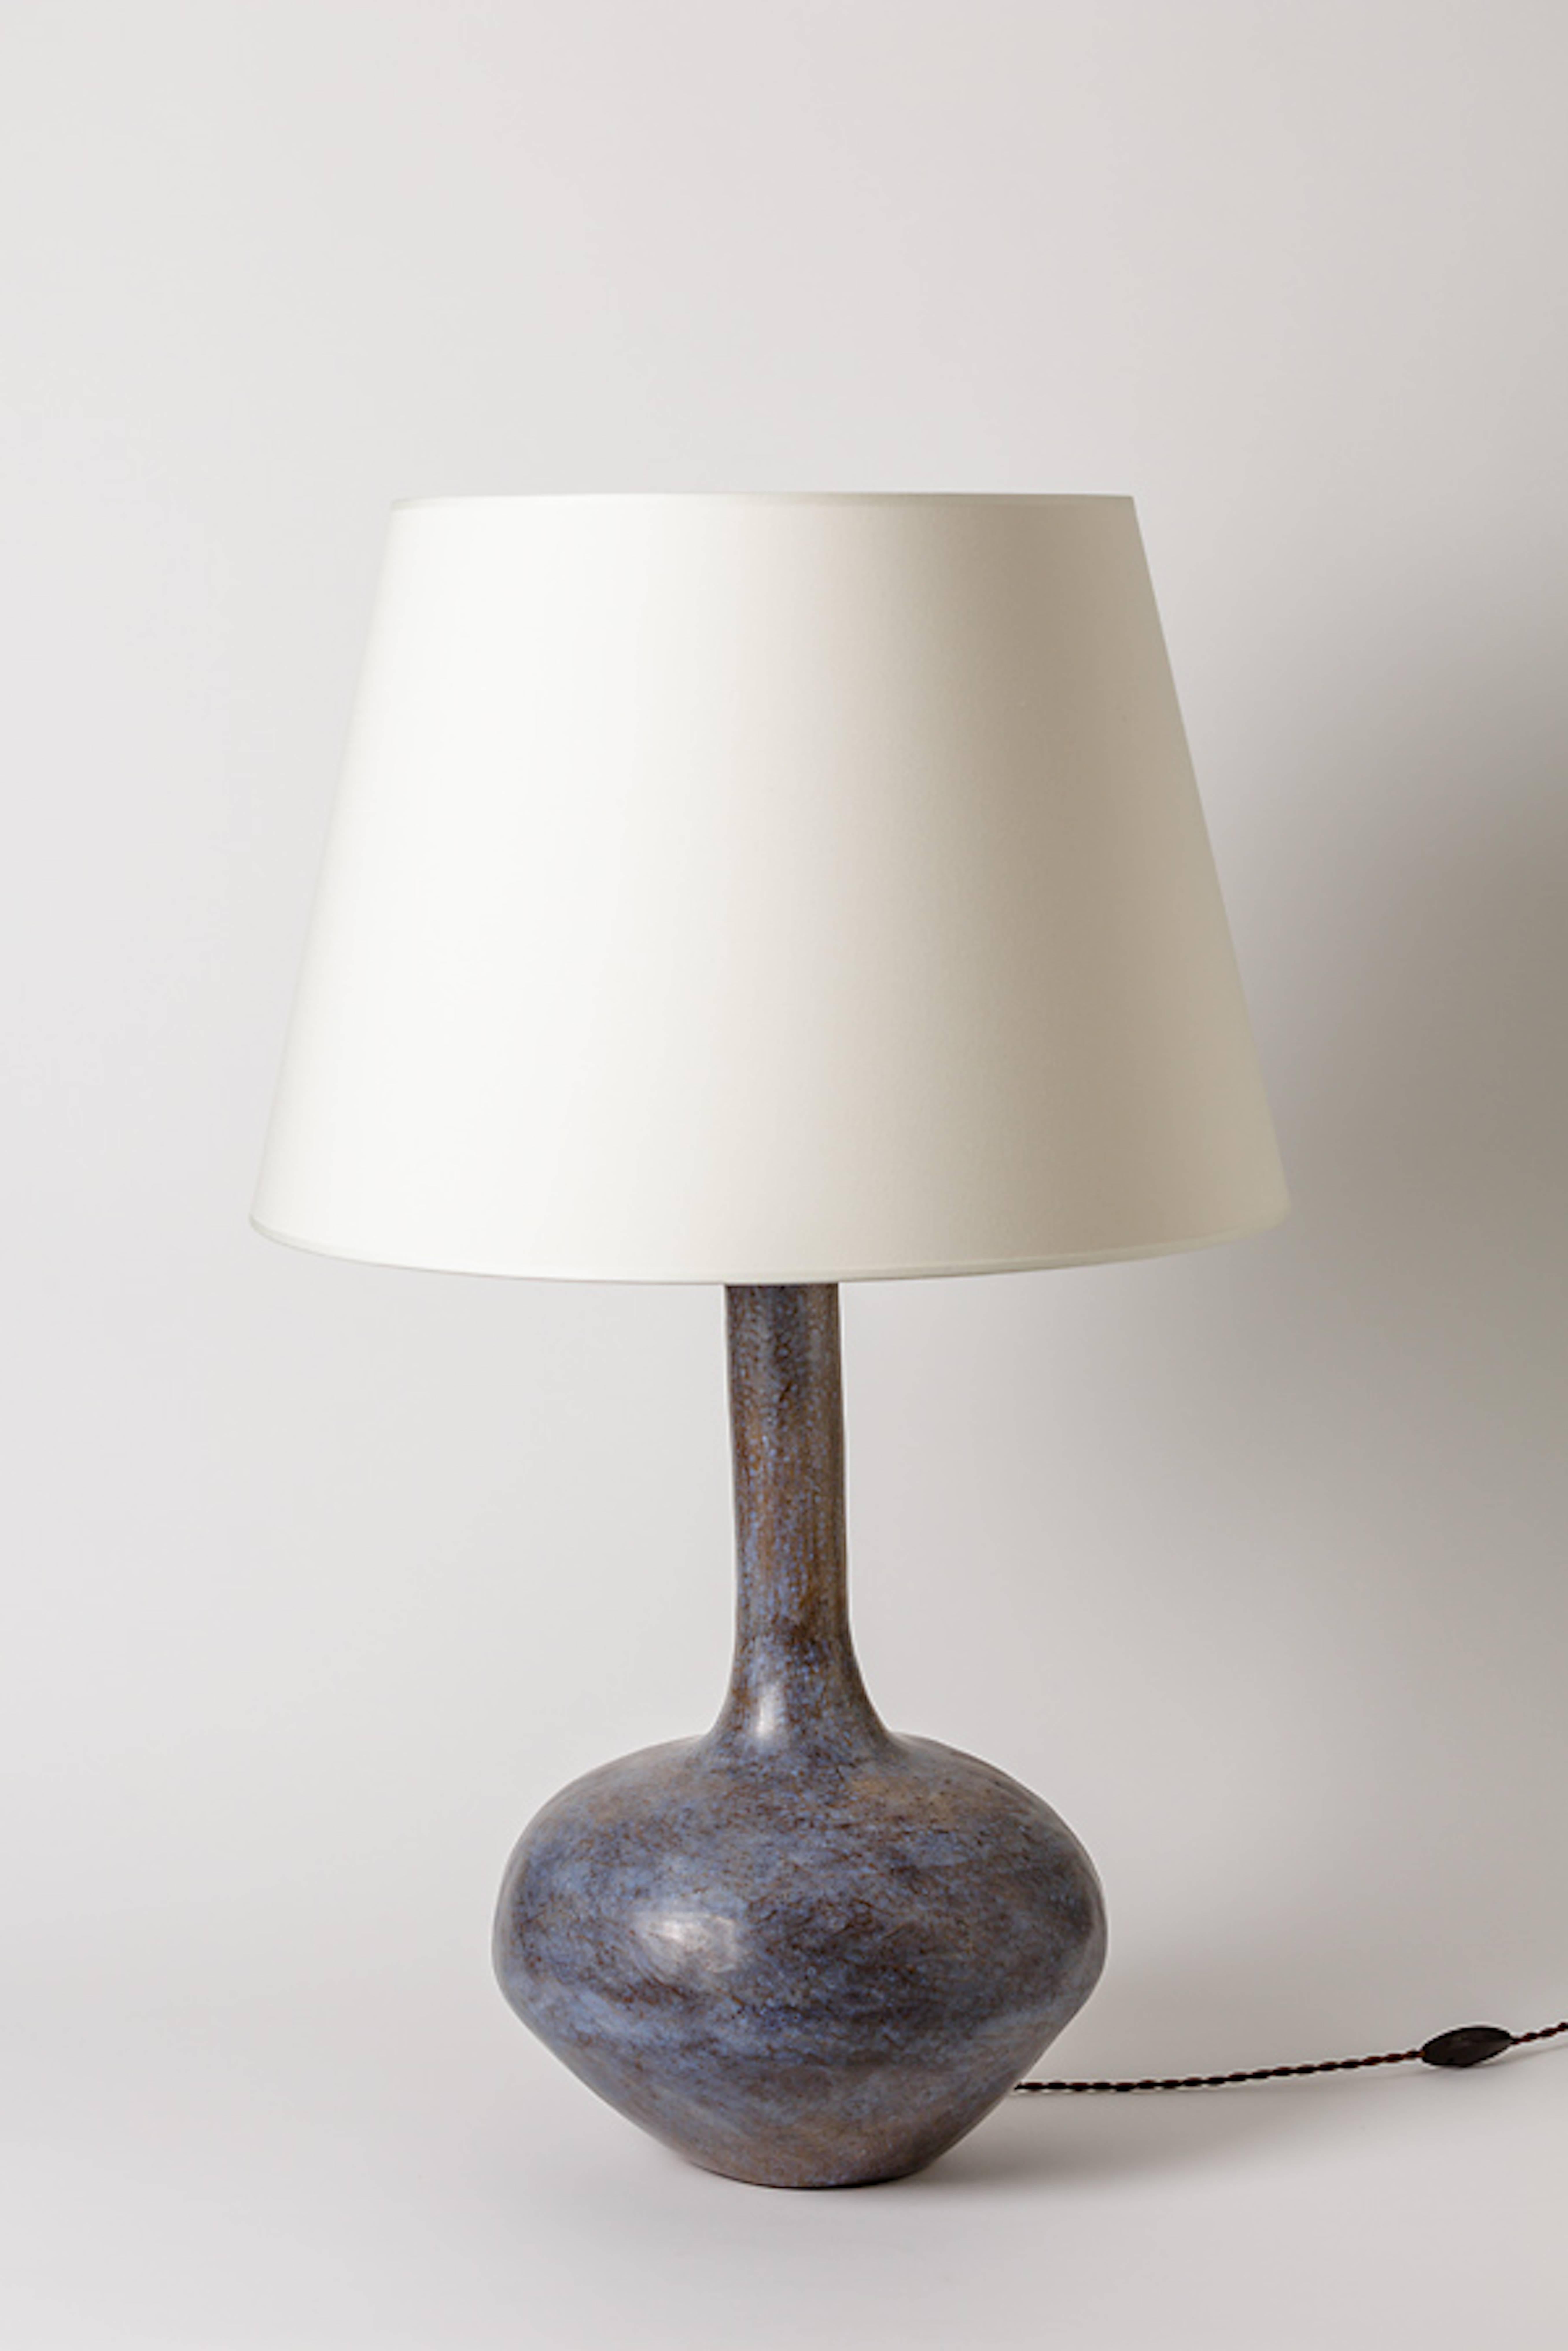 French handmade ceramic table lamp

Important ceramic lamp signed under the base

Original 20th midcentury design

unique piece , circa 1970

Elegant light grey or blue ceramic glaze color

Electric system is new

Sold without lamp shade